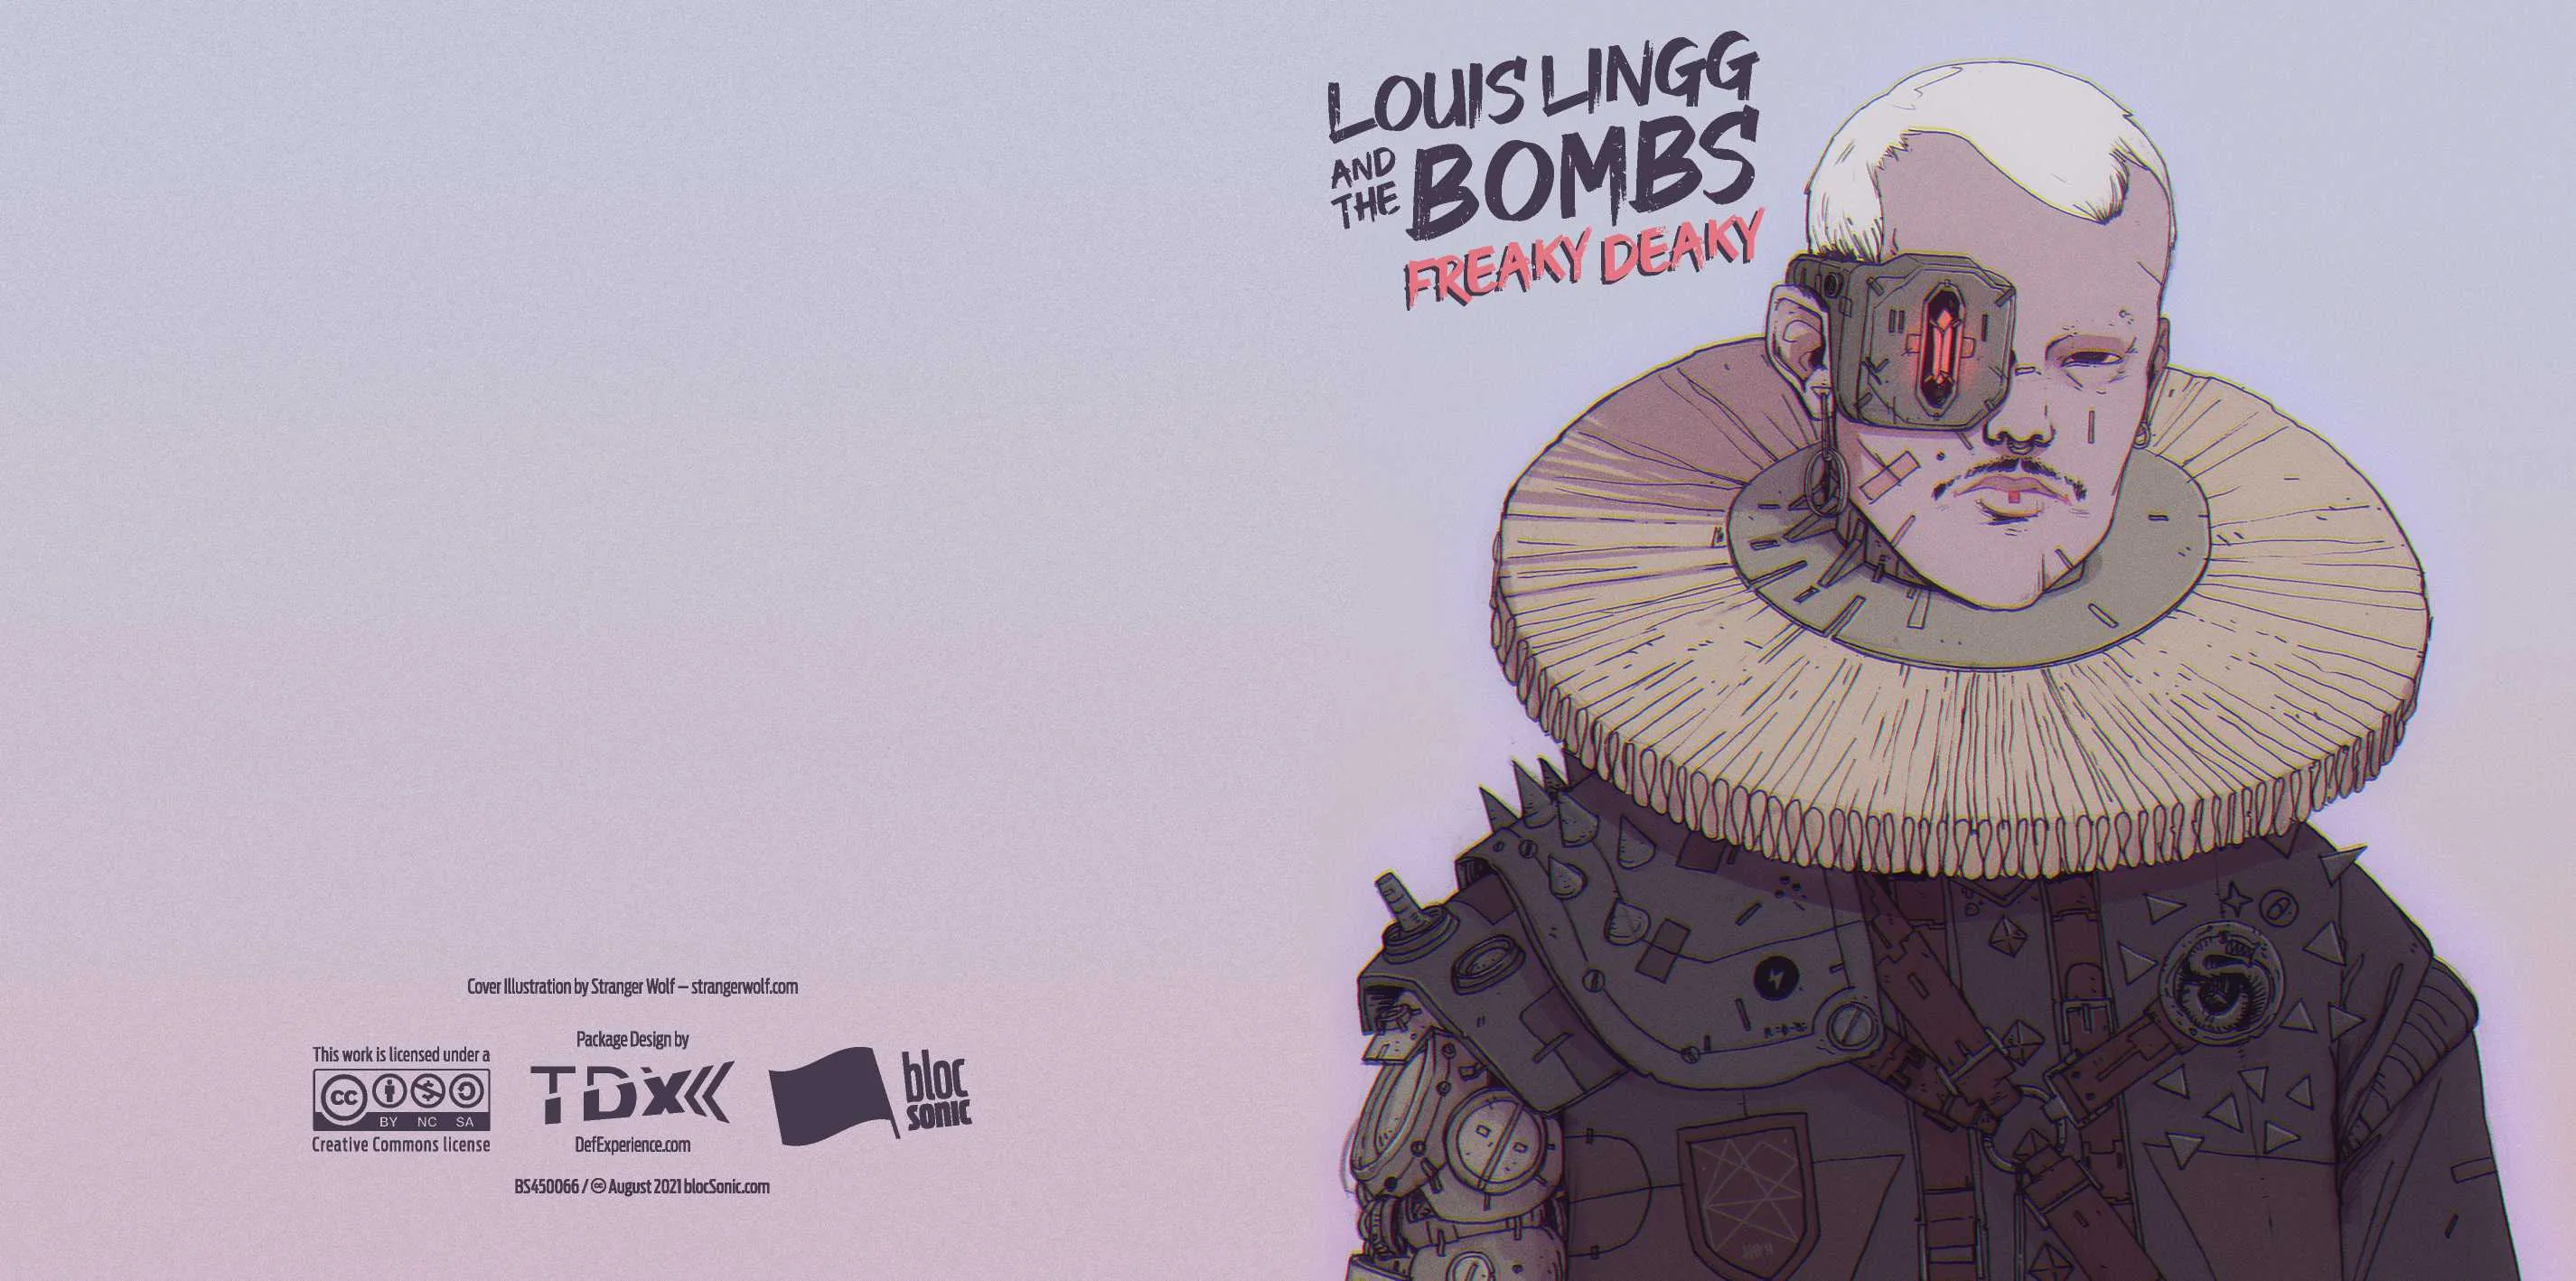 Album insert for “Freaky Deaky” by Louis Lingg and The Bombs